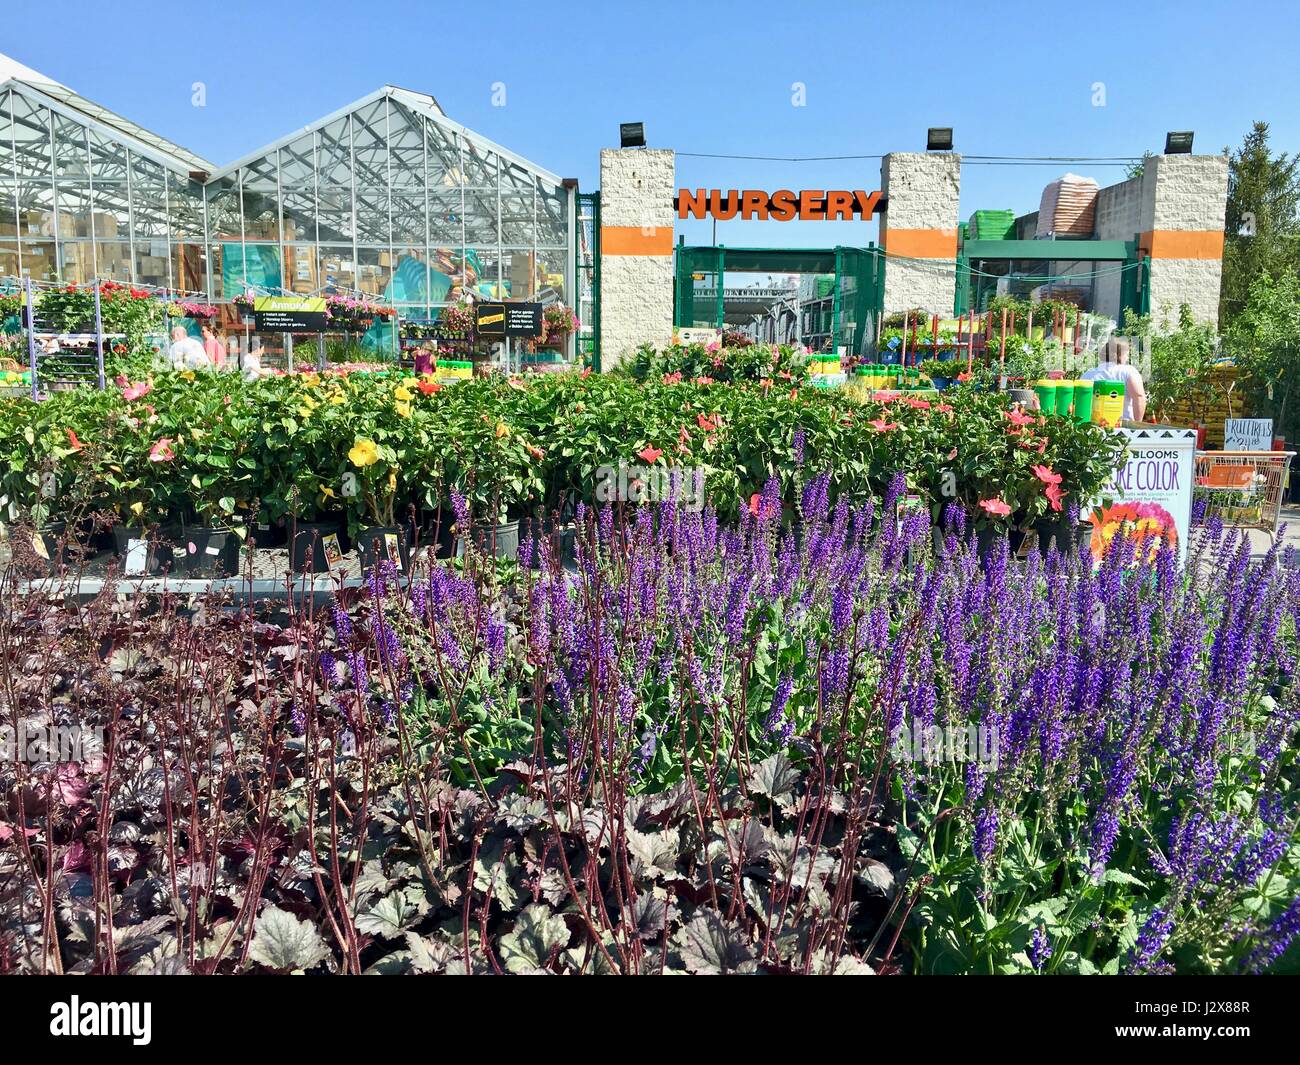 Home Depot Nursery Filled With Fresh Plants Flowers And